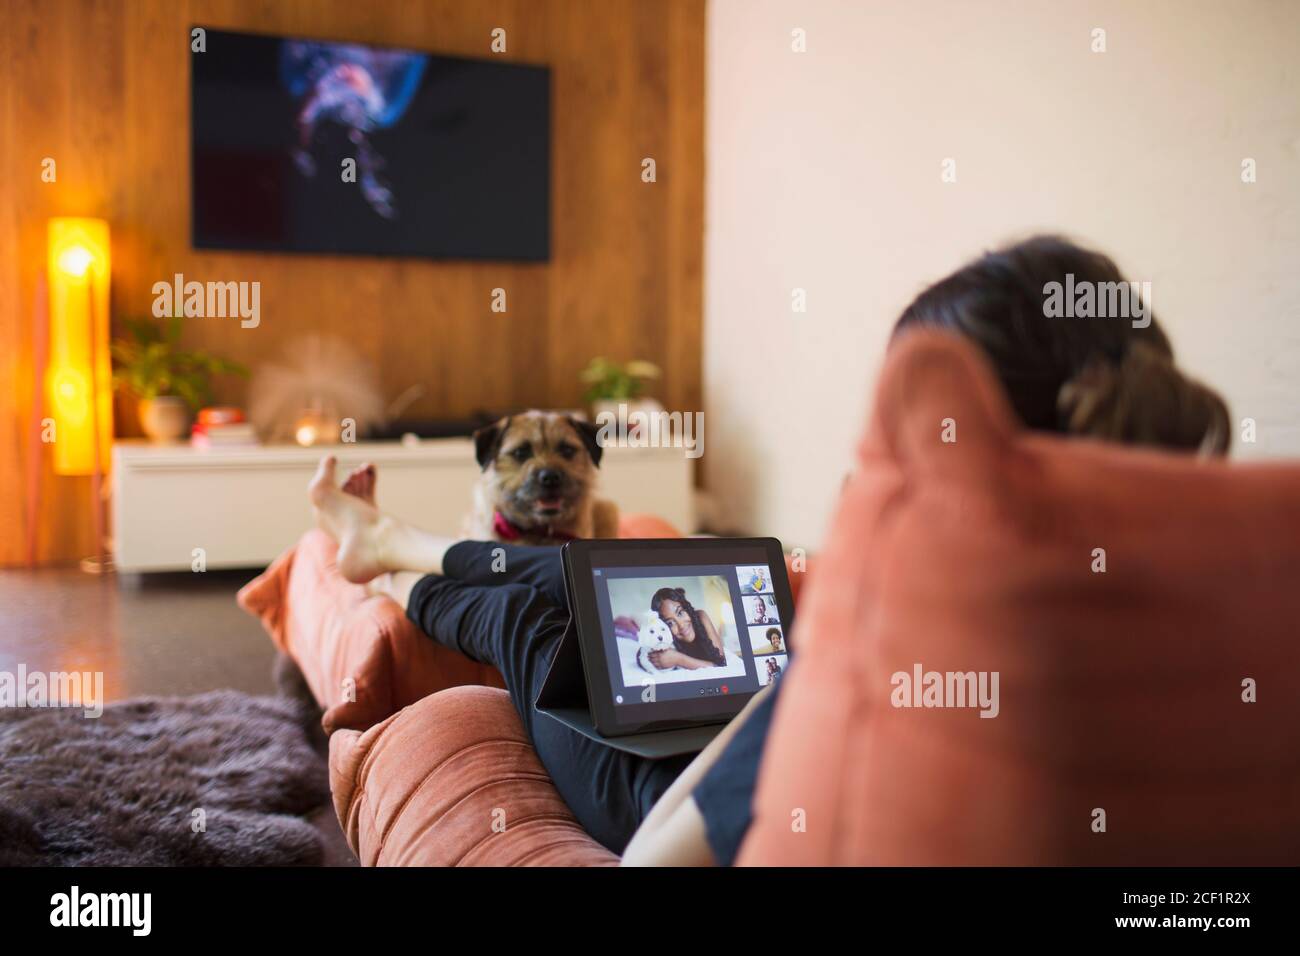 Woman with dog video chatting with friends on digital tablet screen Stock Photo